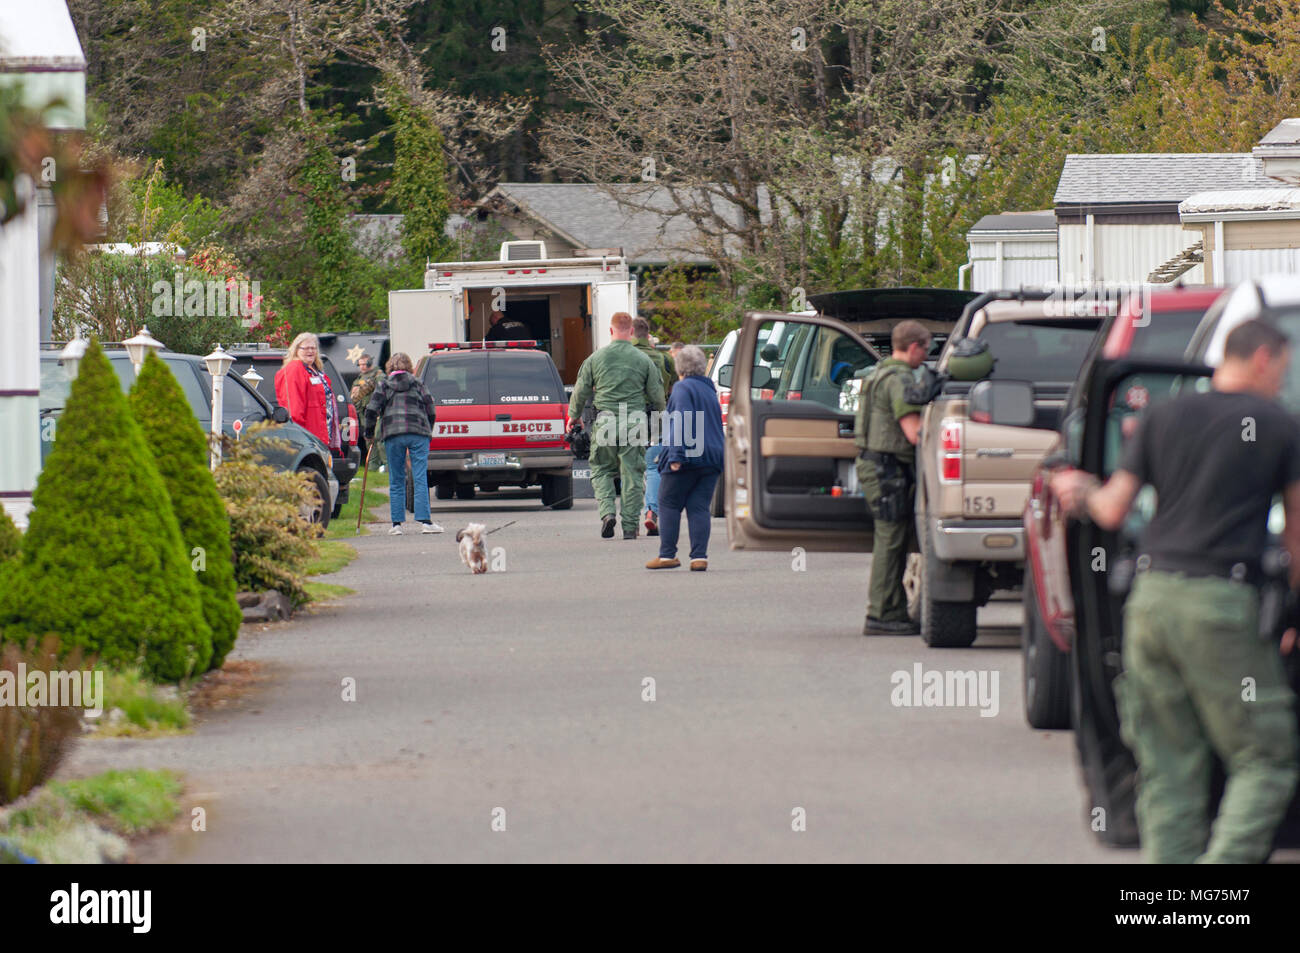 Scene of a SWAT respoShelton, Washington, USA, 27 April 2018.  Mason County Sheriff respond to the scene where a man stabbed a process server.  This was taken after the man was arrested and taken to the hospital witha dog bite wound.  It appears that police rammed the trailer with their SWAT vehicle.  Hidden Haven Mobile Home park scene of stand off today in Mason County. (Shawna Whelan)nse in Mason County Credit: Shawna Whelan/Alamy Live News Stock Photo